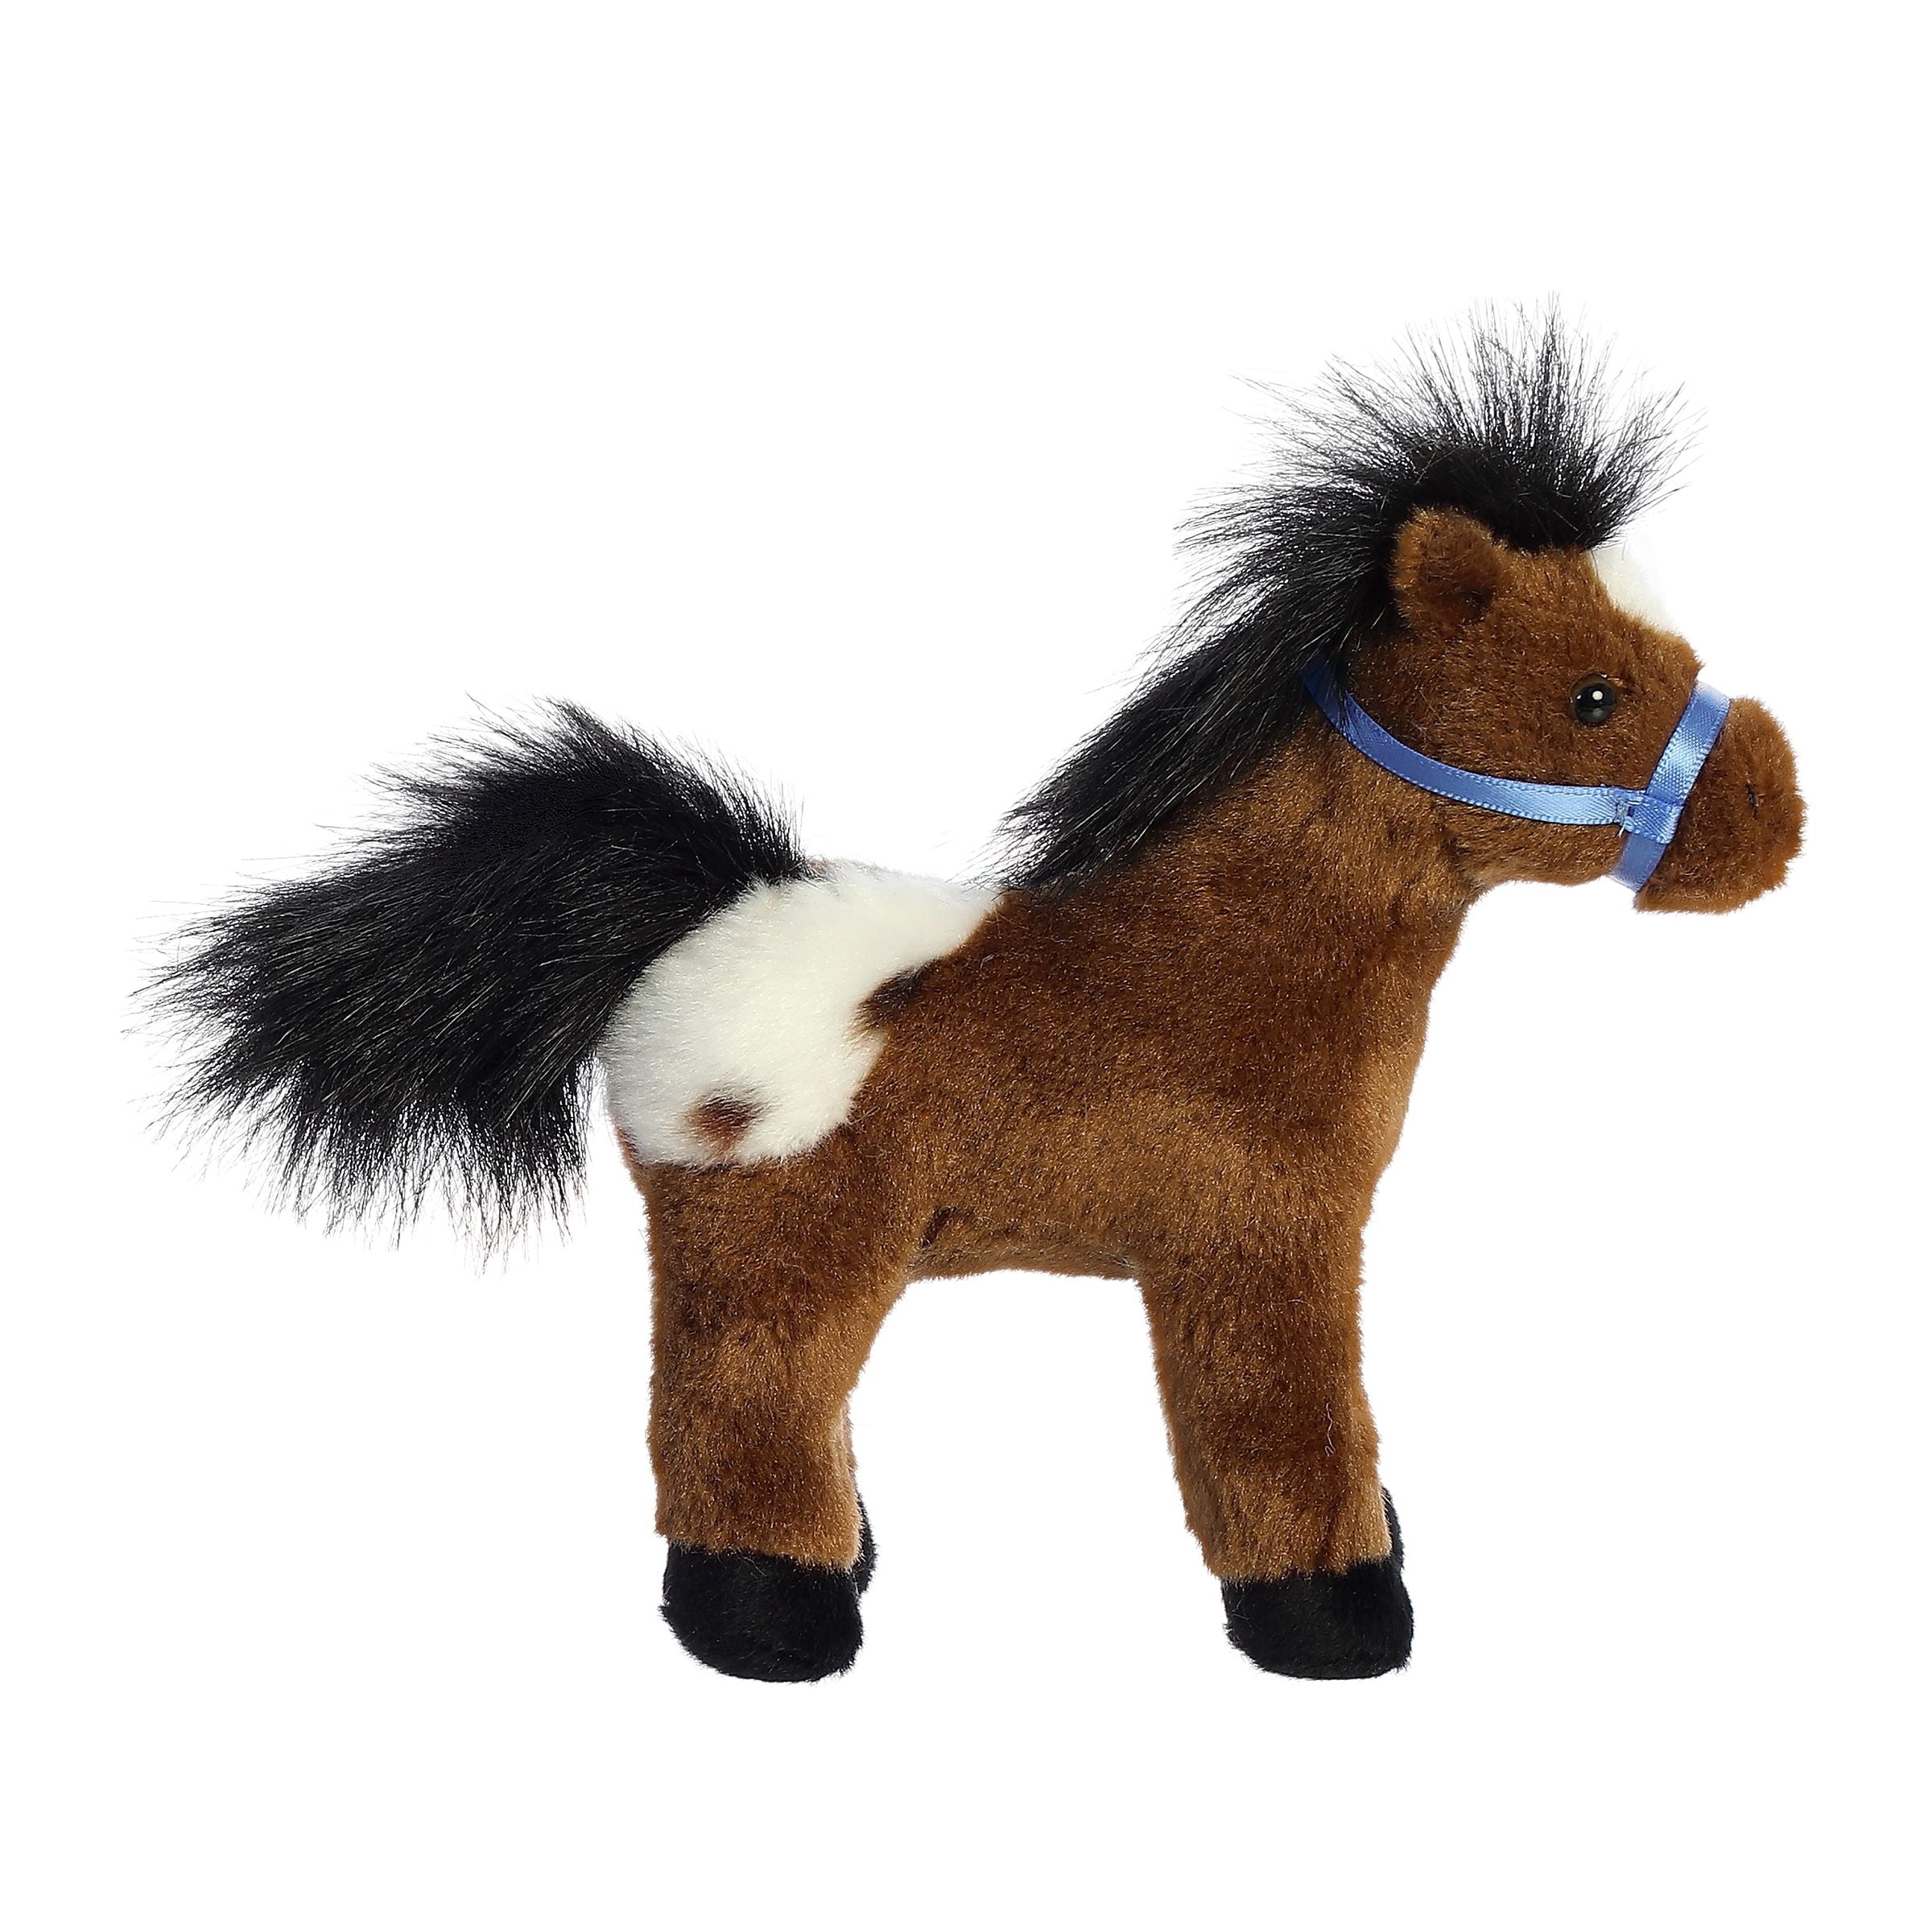 Aurora Stuffed Animal, 8 Mocha Horses - Chick Elms Grand Entry Western  Store and Rodeo Shop